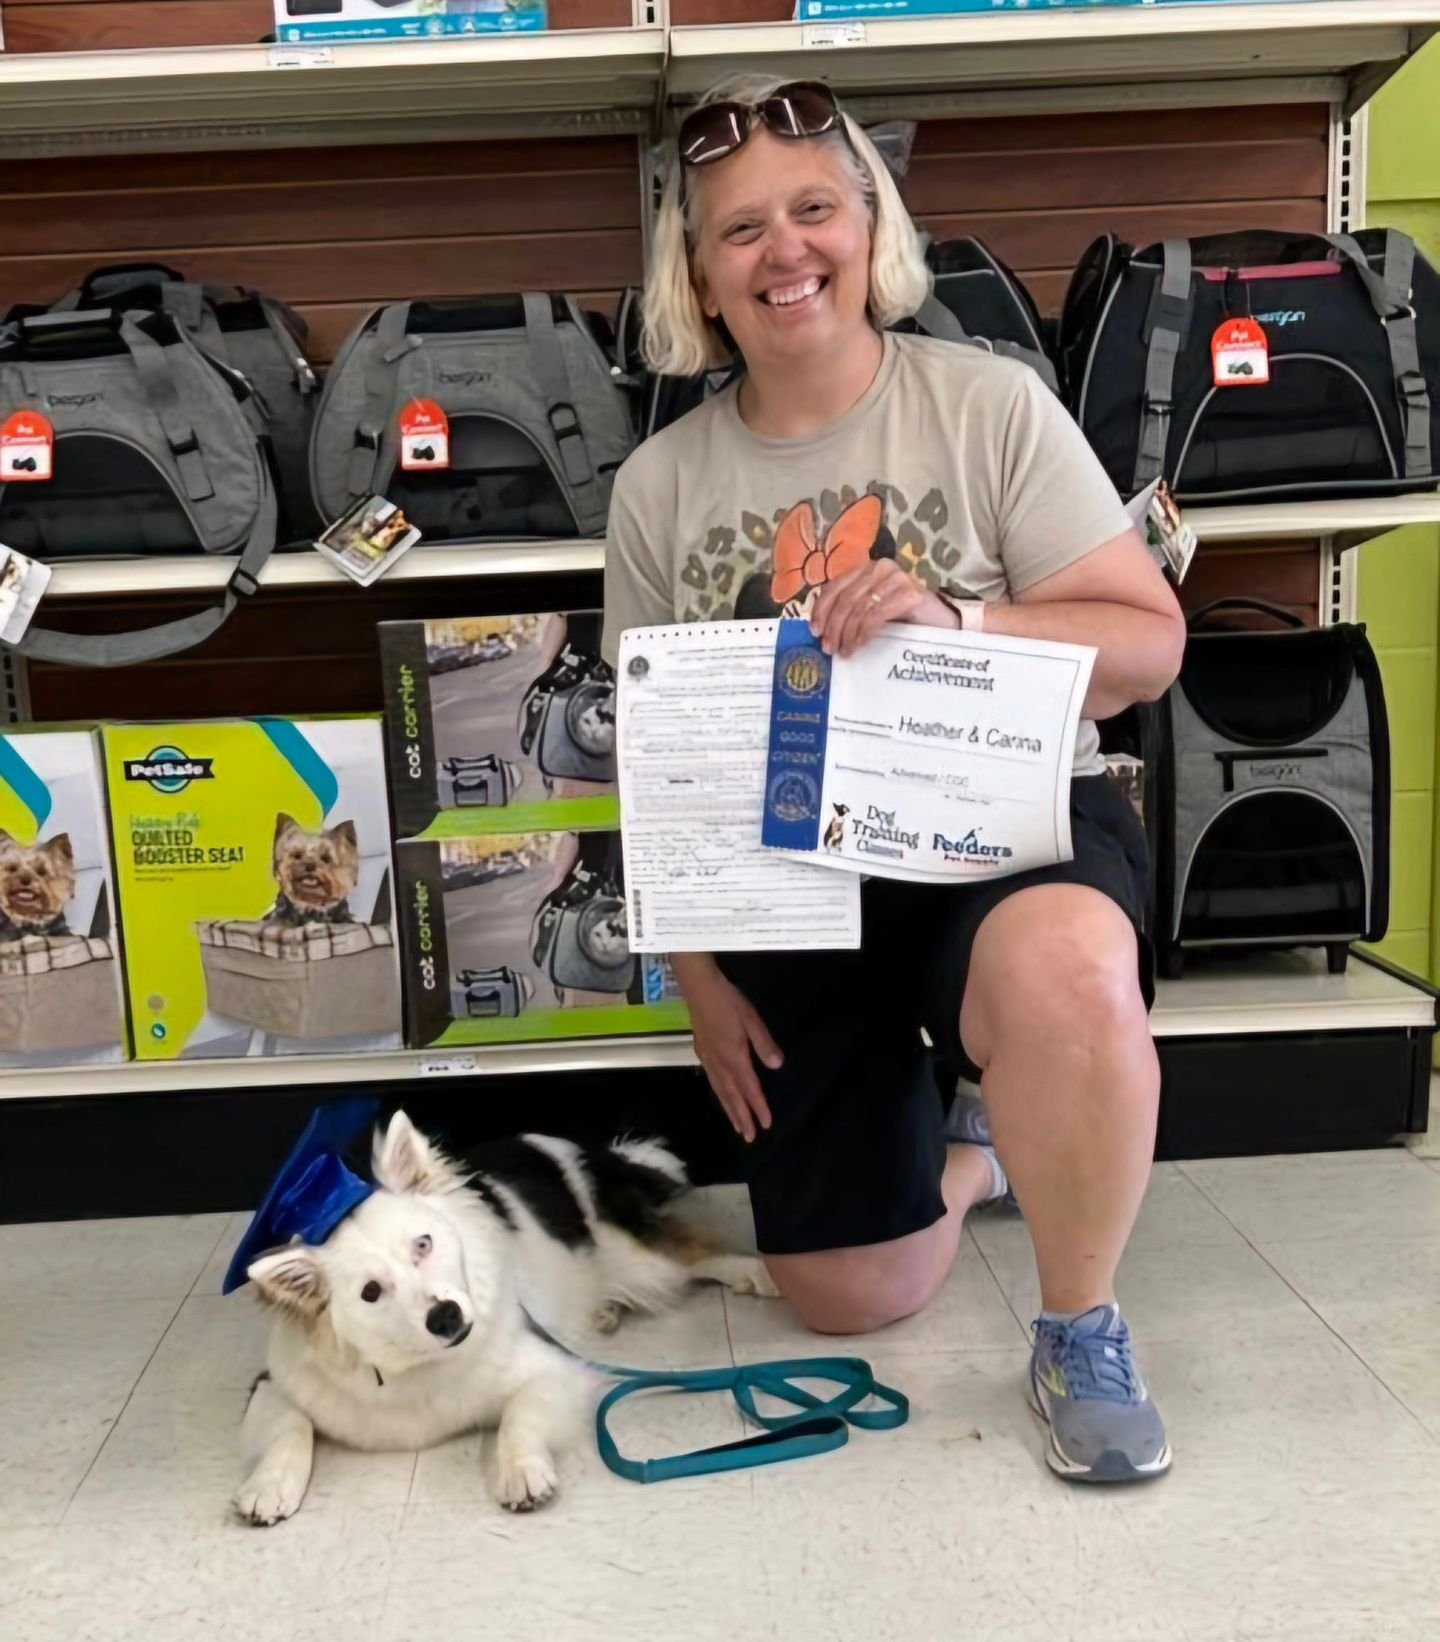 Congratulations to Heather and Carina on passing the CGC test and graduating from Advanced Obedience/CGC Class!!! They are such a wonderful team. 🥰

Multi Group-Placing BPUP Apricity's Stj&ouml;rnumerki Carina CGC TKN RATN